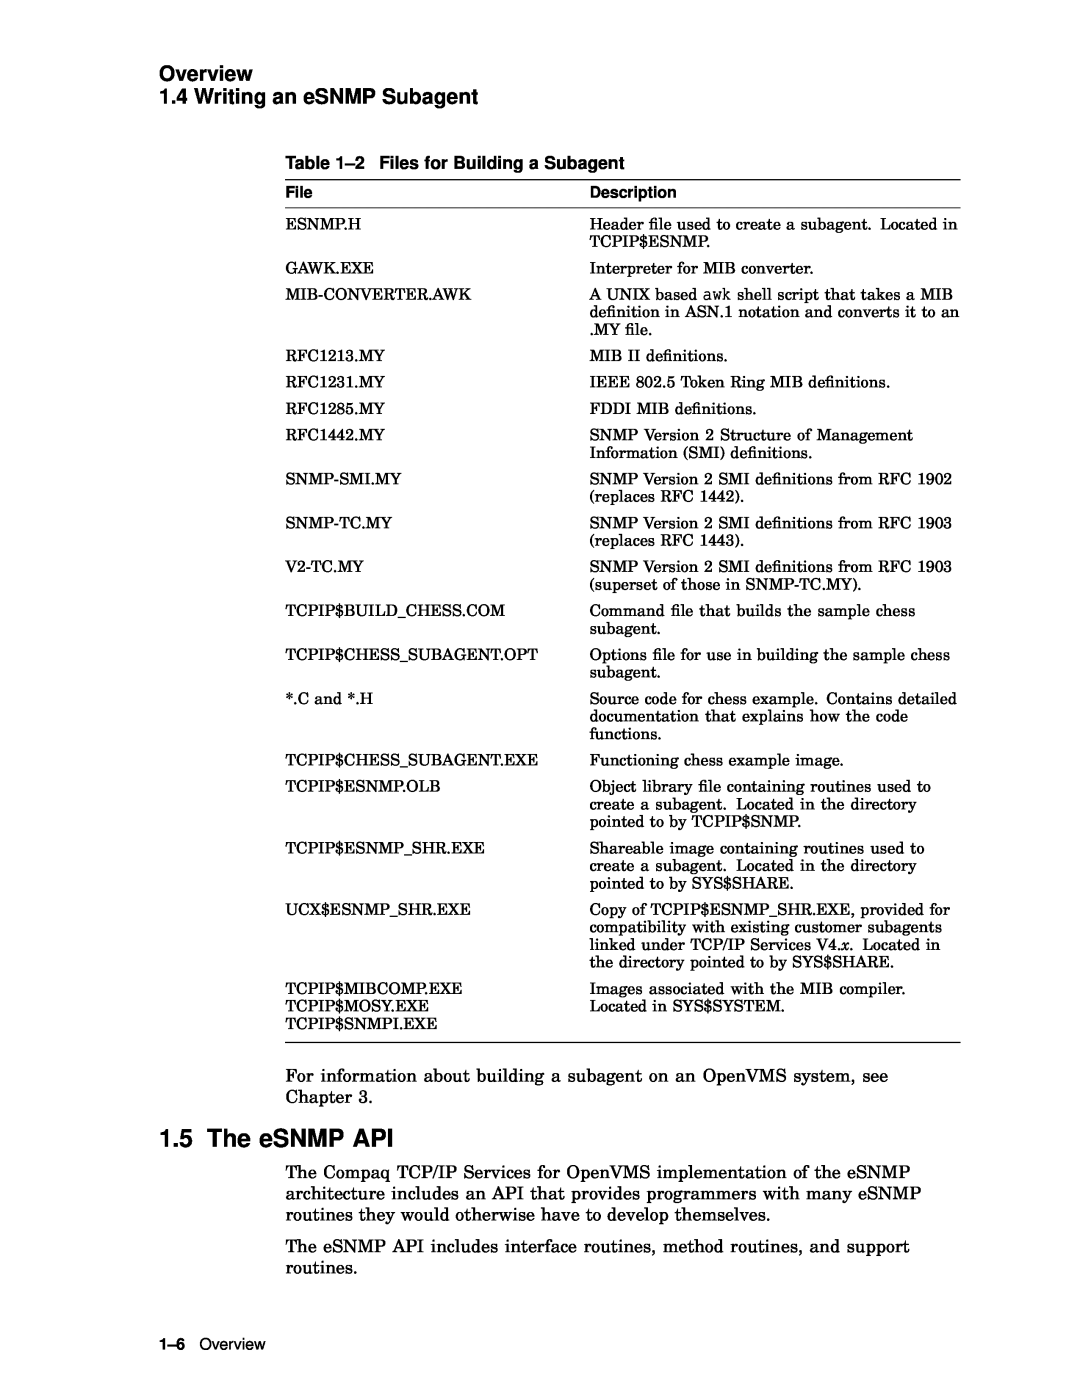 Compaq AAR04BCTE manual The eSNMP API, Overview 1.4 Writing an eSNMP Subagent, 2 Files for Building a Subagent 